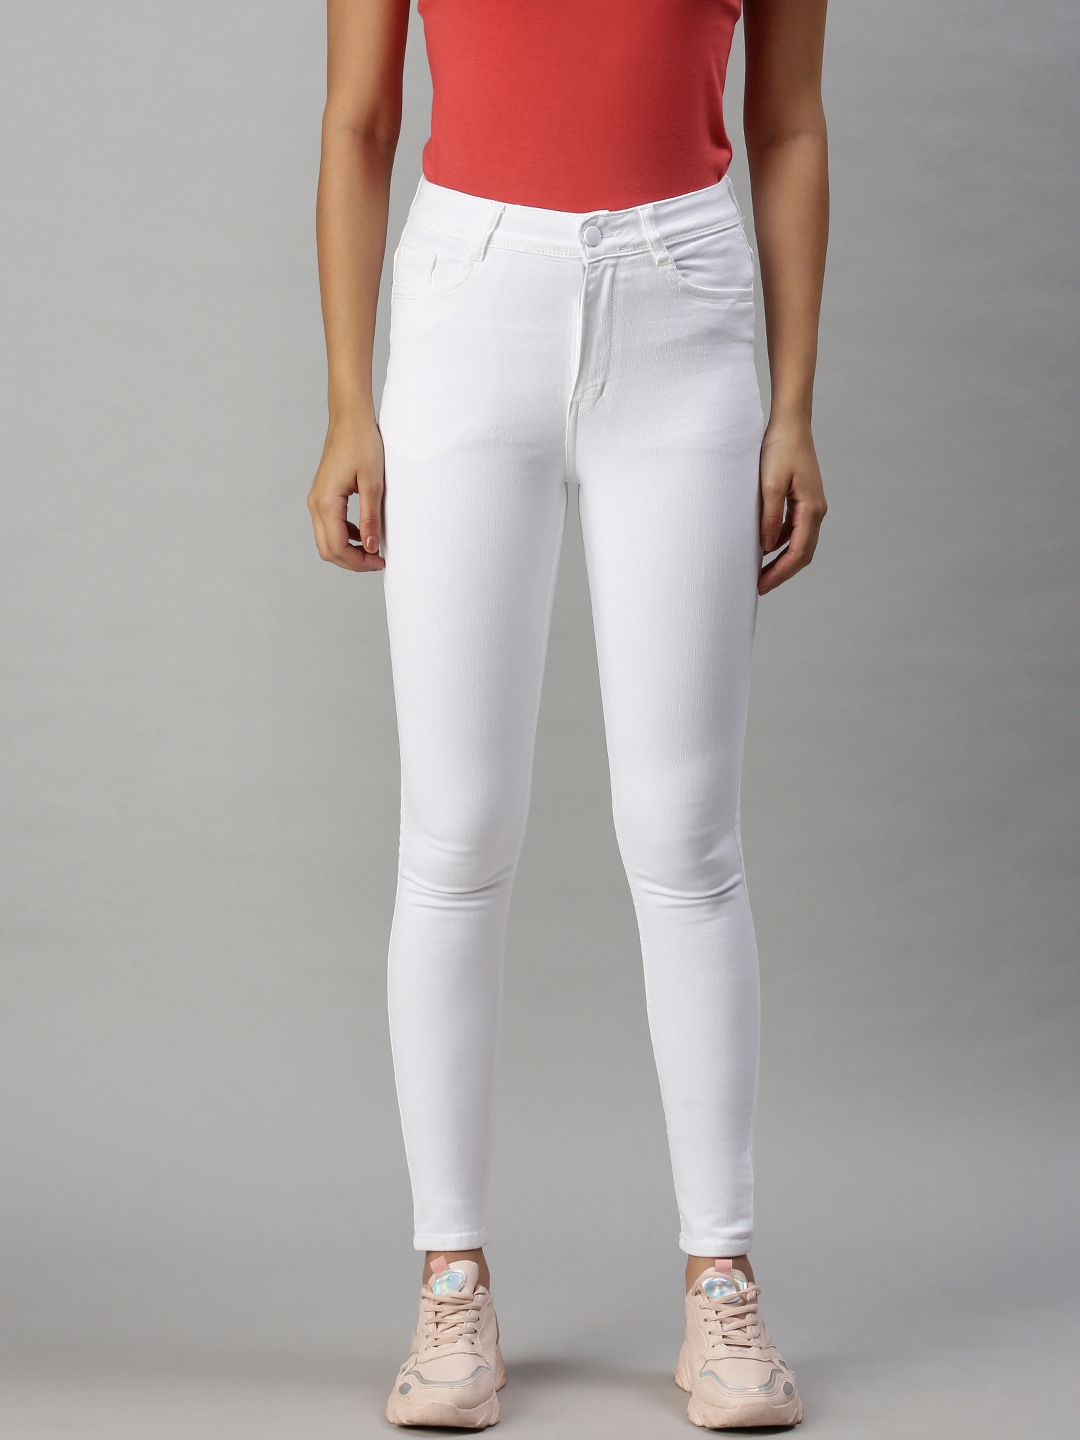 Showoff Women's Casual Slim Fit High-Rise White Jeans